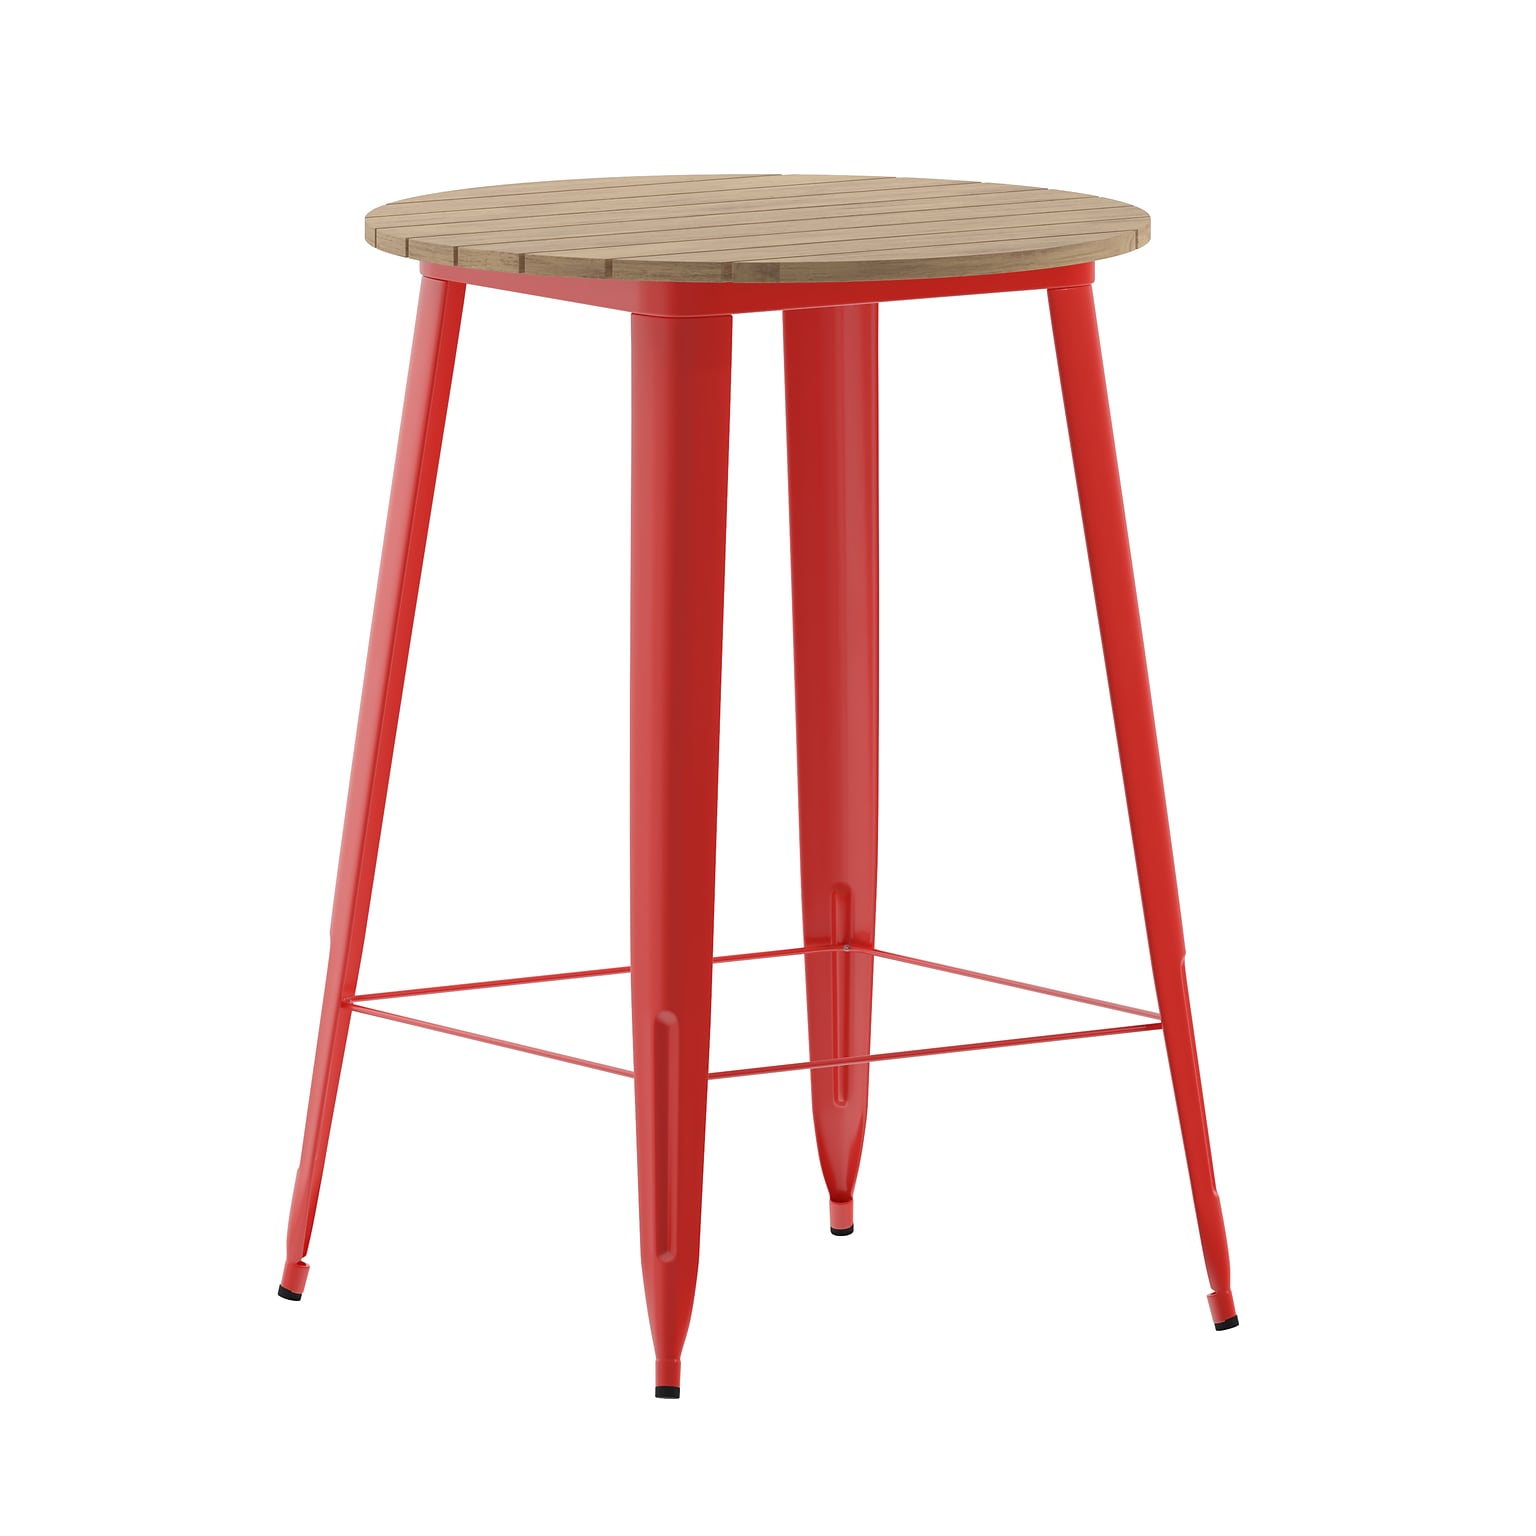 Flash Furniture Declan Indoor/Outdoor Bar Top Table, 42, Brown Top with Red Base (JJT14623H76BRRD)